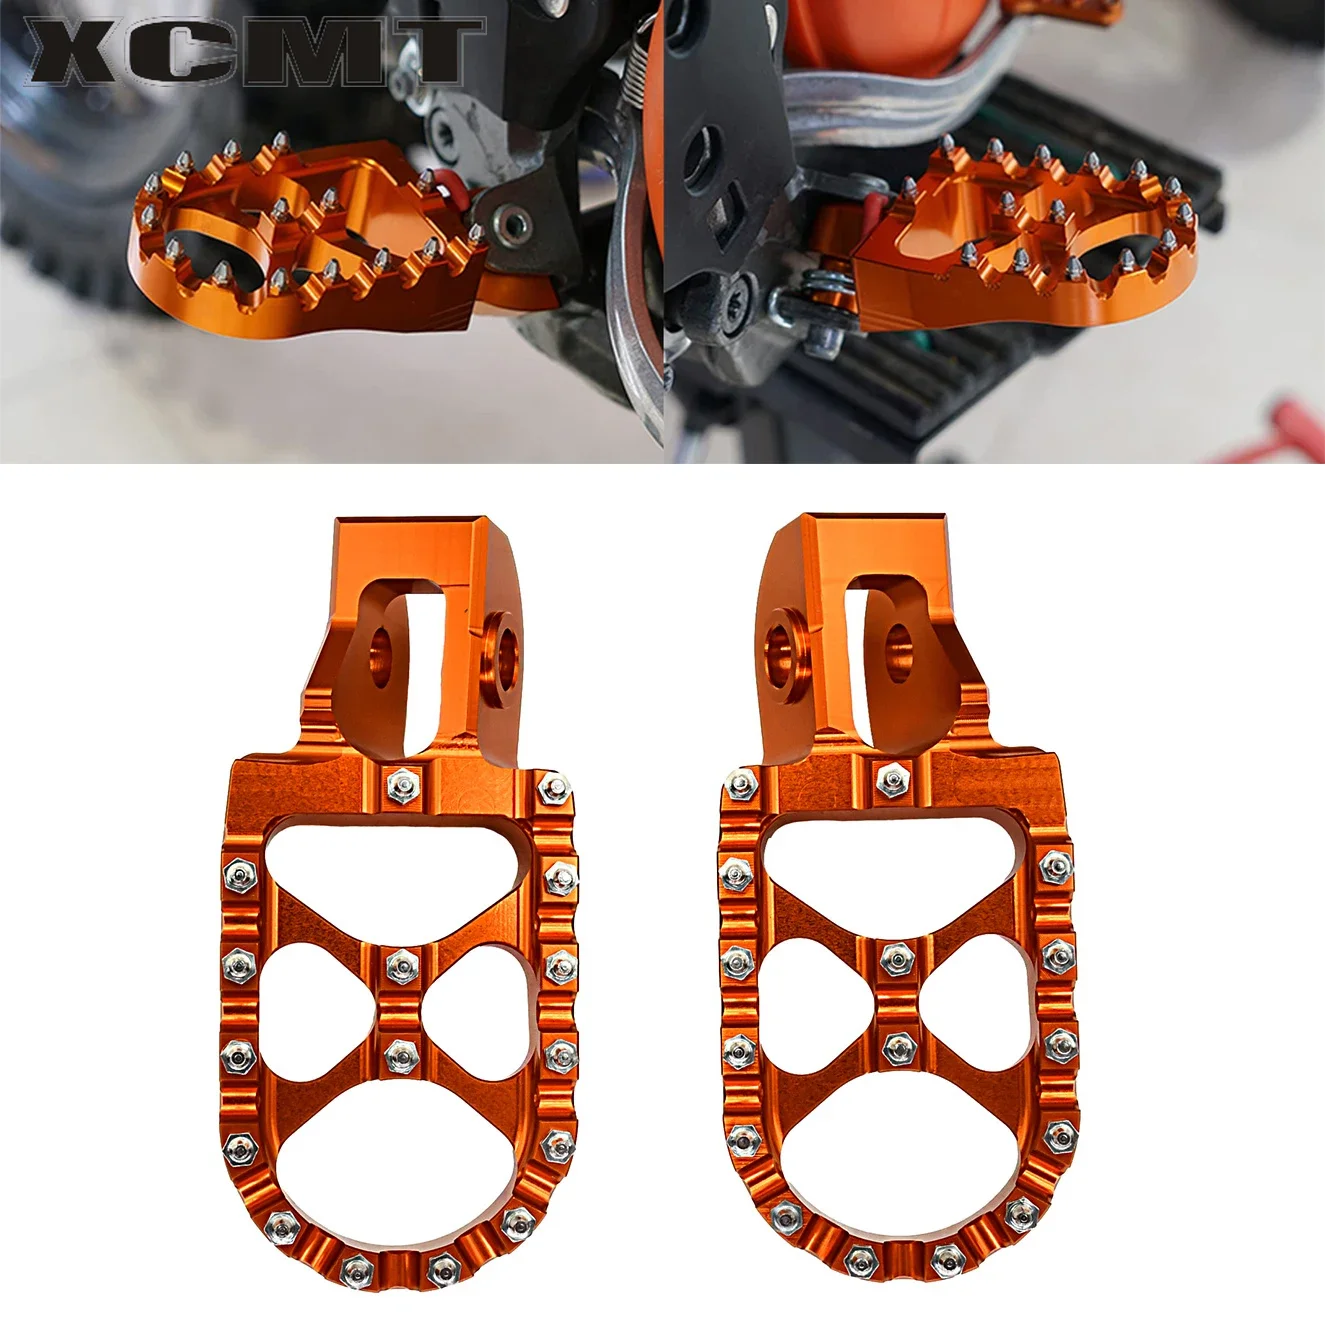 Cnc foot pegs pedal footrests for ktm 125 150 200 250 300 350 450 500 sx thumb200